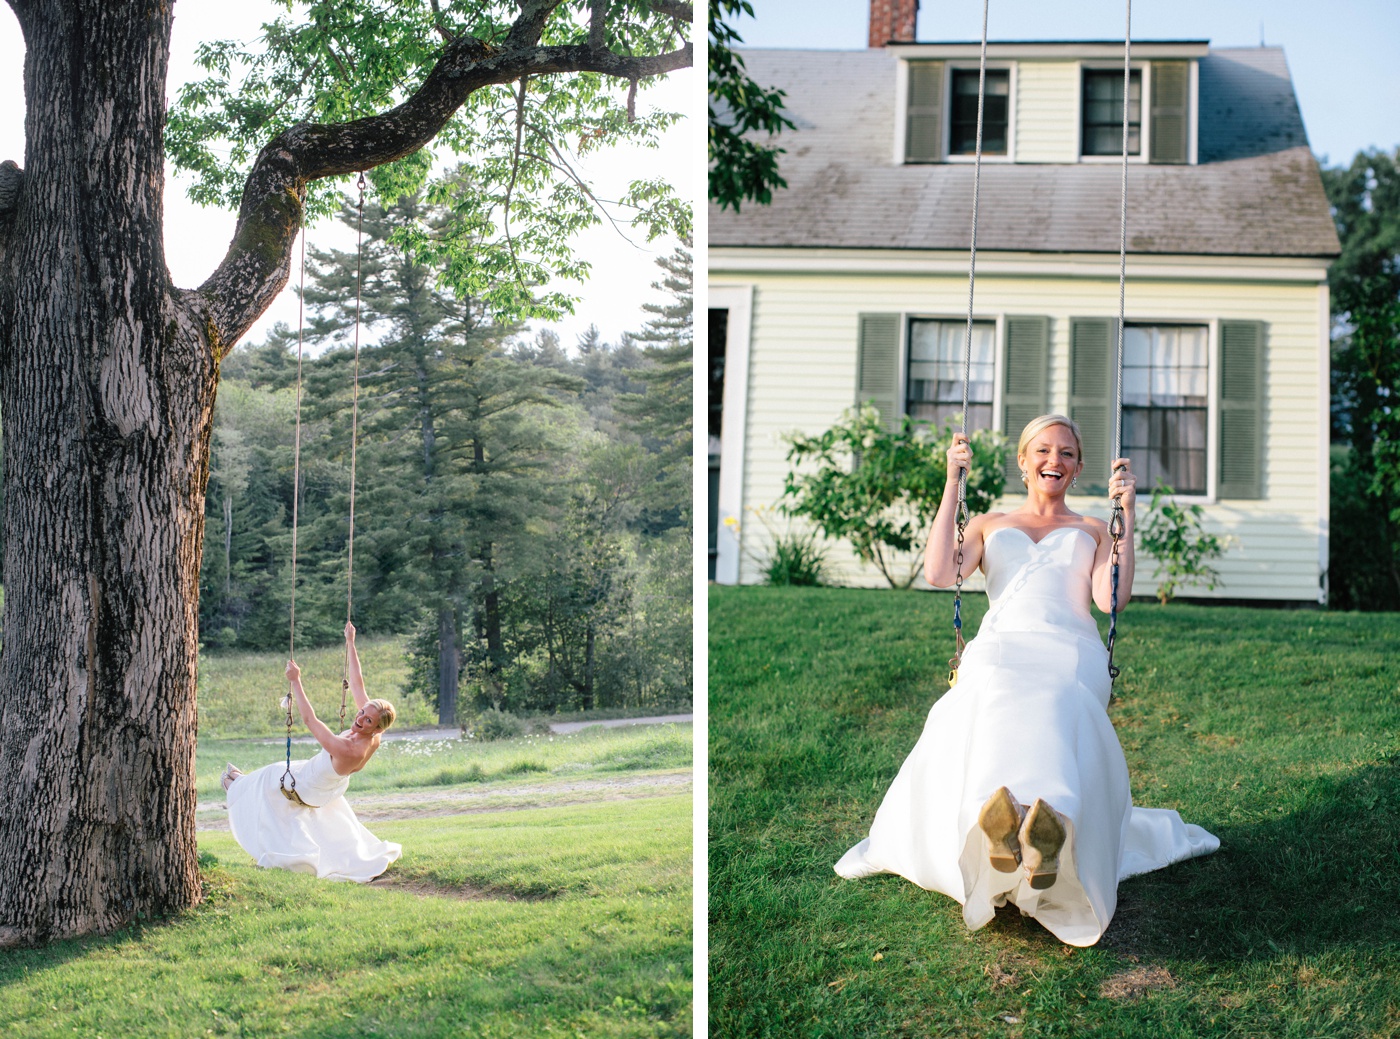 Bridal portraits on a family farm in New Hampshire